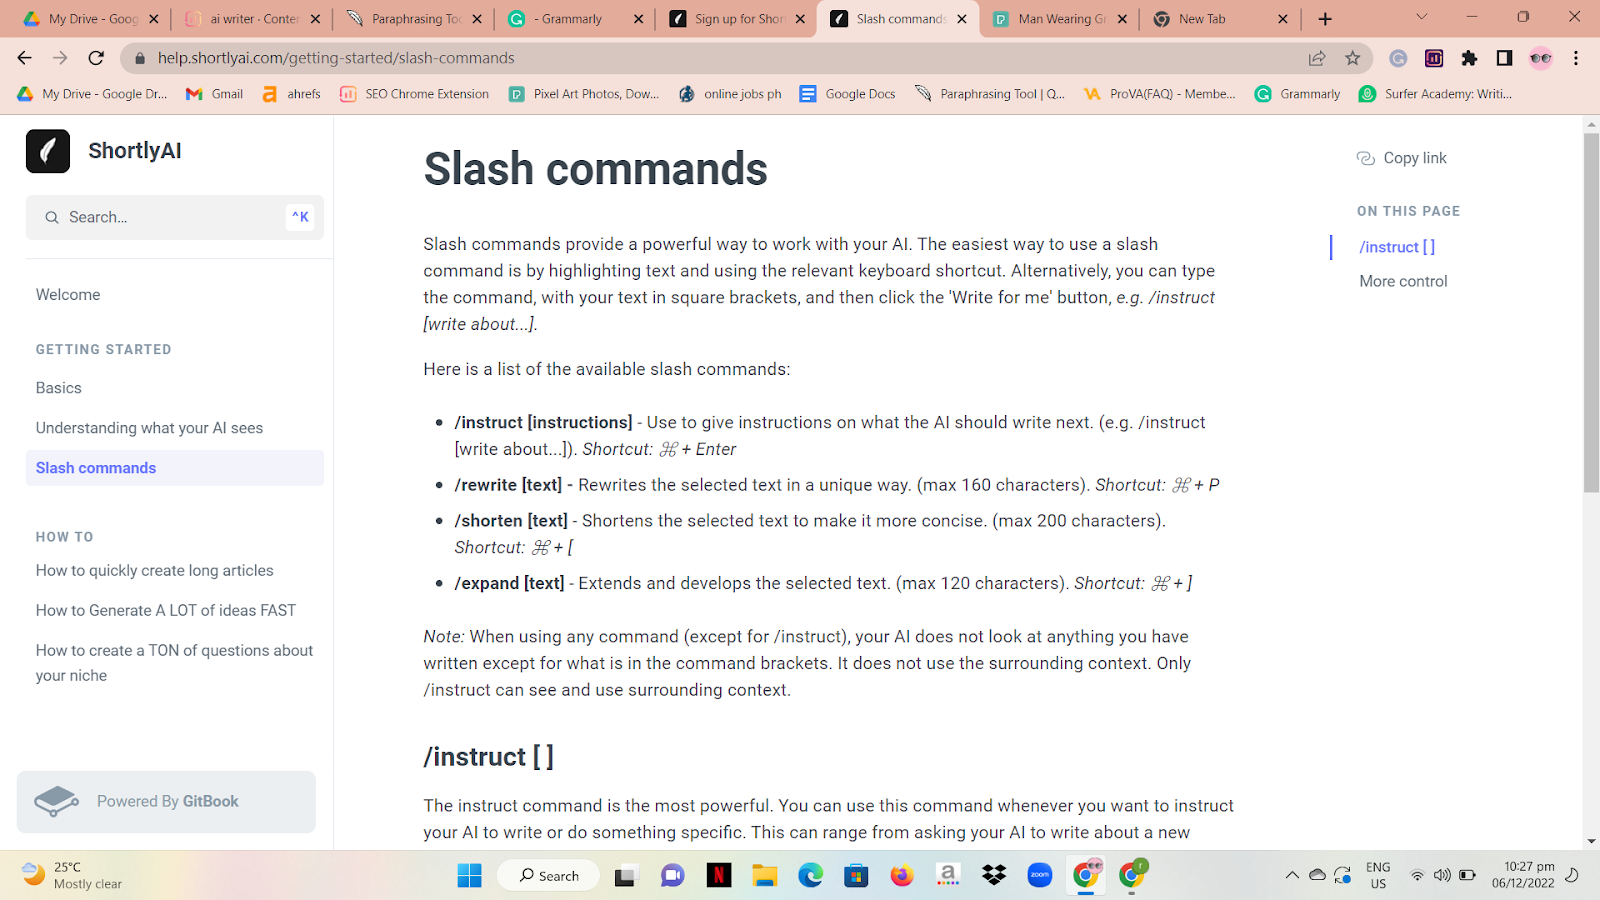 Slash commands are a practical approach to communicating with your AI. 